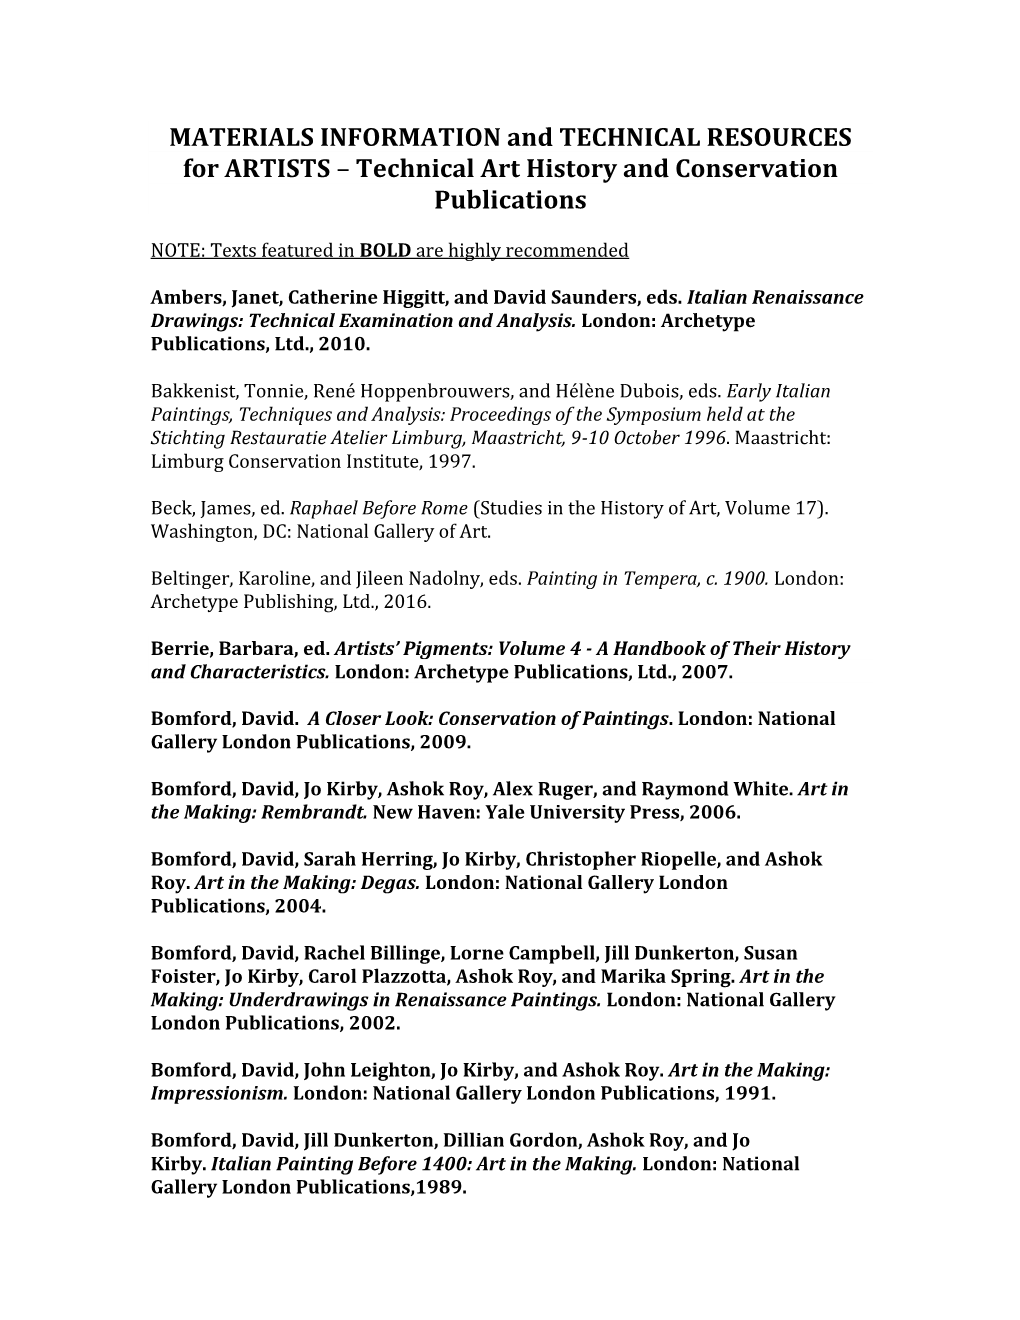 Technical Art History and Conservation Publications